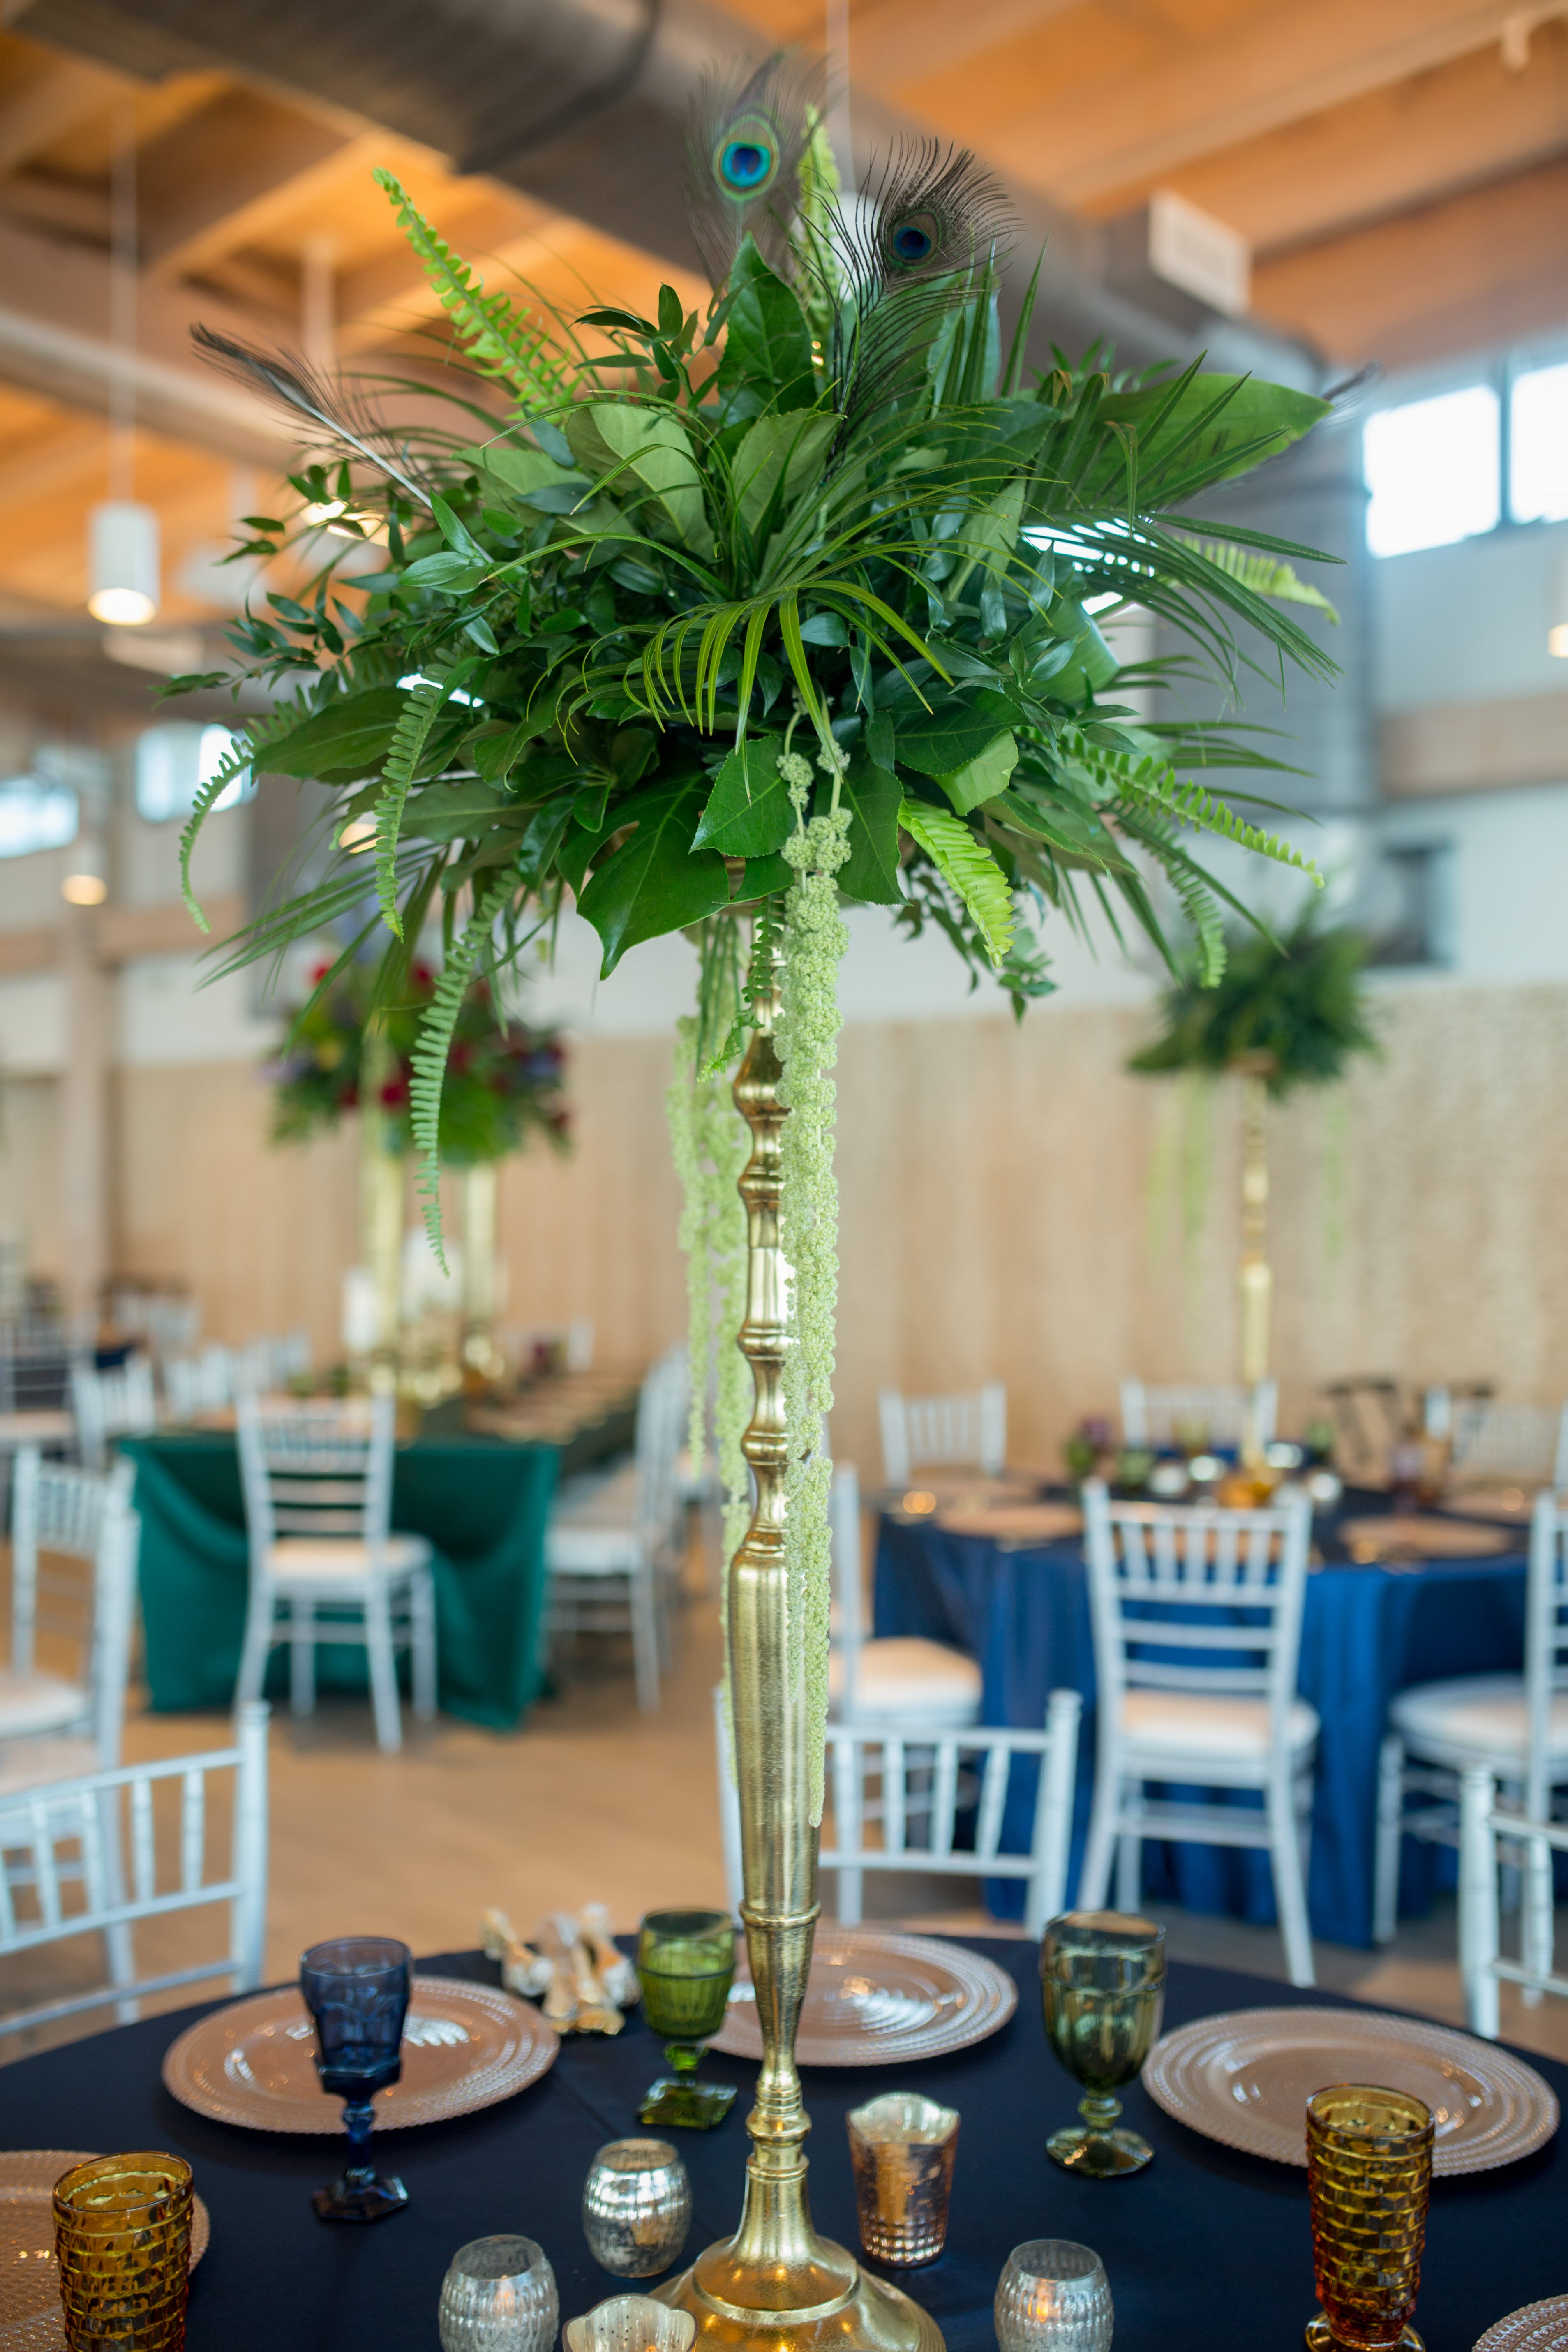 Elegant and Eclectic Jewel Toned Themed Reception Wedding Decor at Tampa River Center, Large Gold Vase Centerpieces with Overflowing Green Floral and Peacock Feather Arrangements | Jewel Tone Tablecloths, Vintage Multi-colored Glass Goblets, Gold Chargers, Tall Silver Candelabras | Tampa Bay Wedding Photographer Andi Diamond Photography